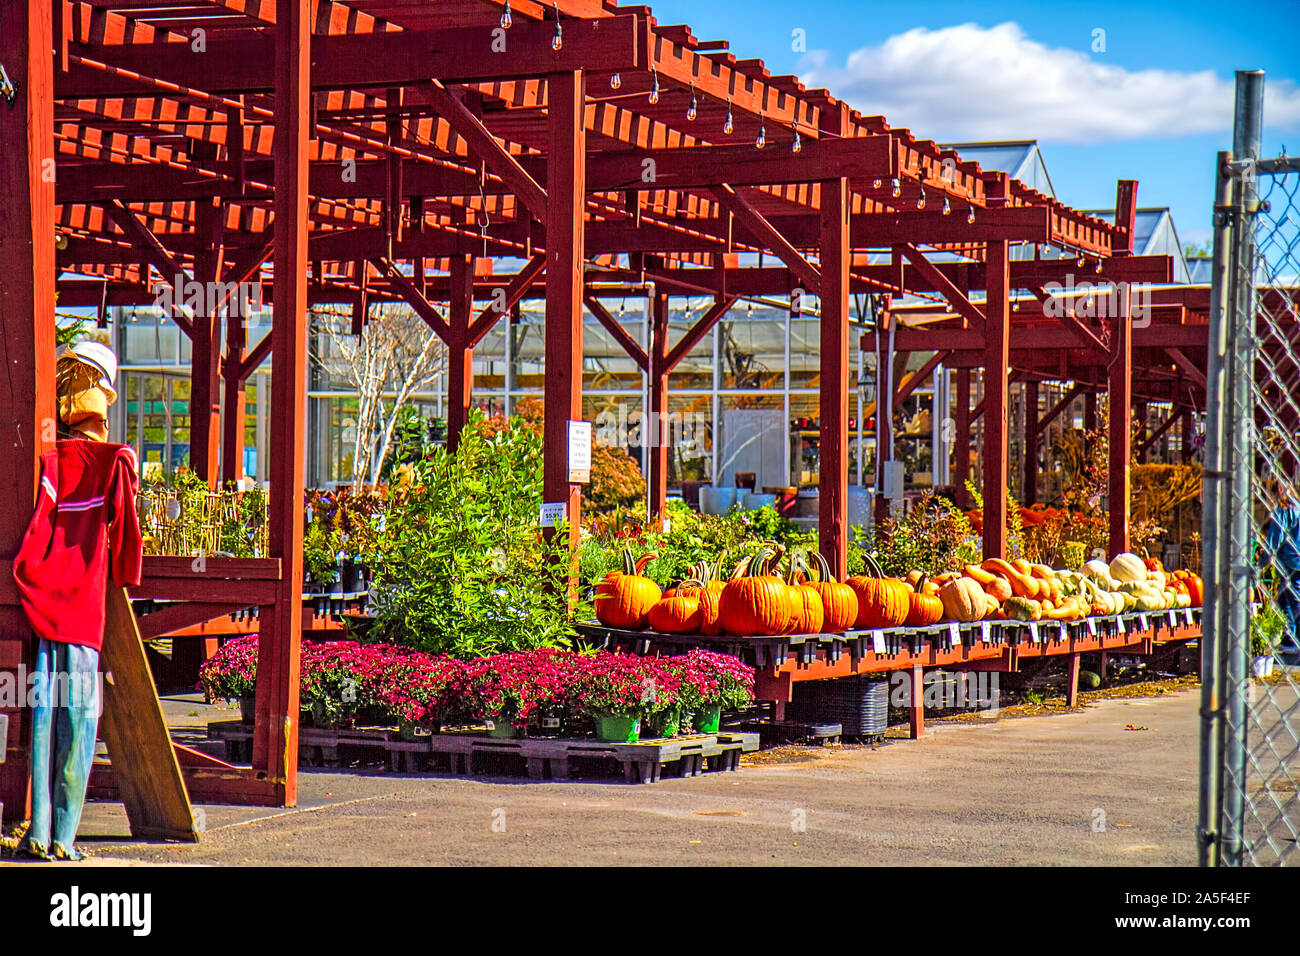 Quaint and popular local farmer's market selling outdoors plants, pumpkins and more in the fall season. Decorated for Fall season and Halloween. Stock Photo